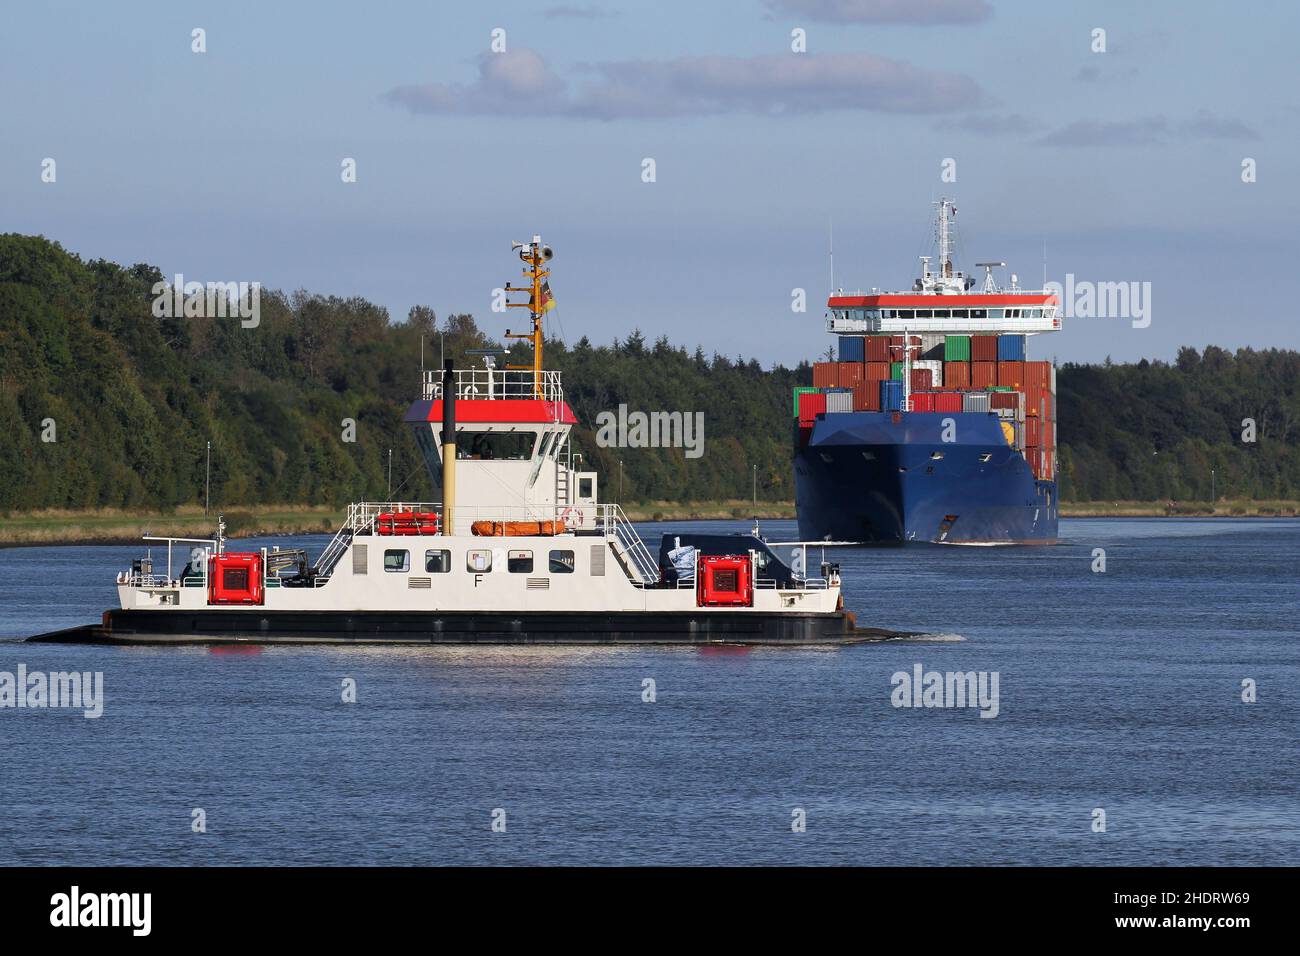 ferry, container ship, kiel canal, ferries, container ships, kiel canals Stock Photo